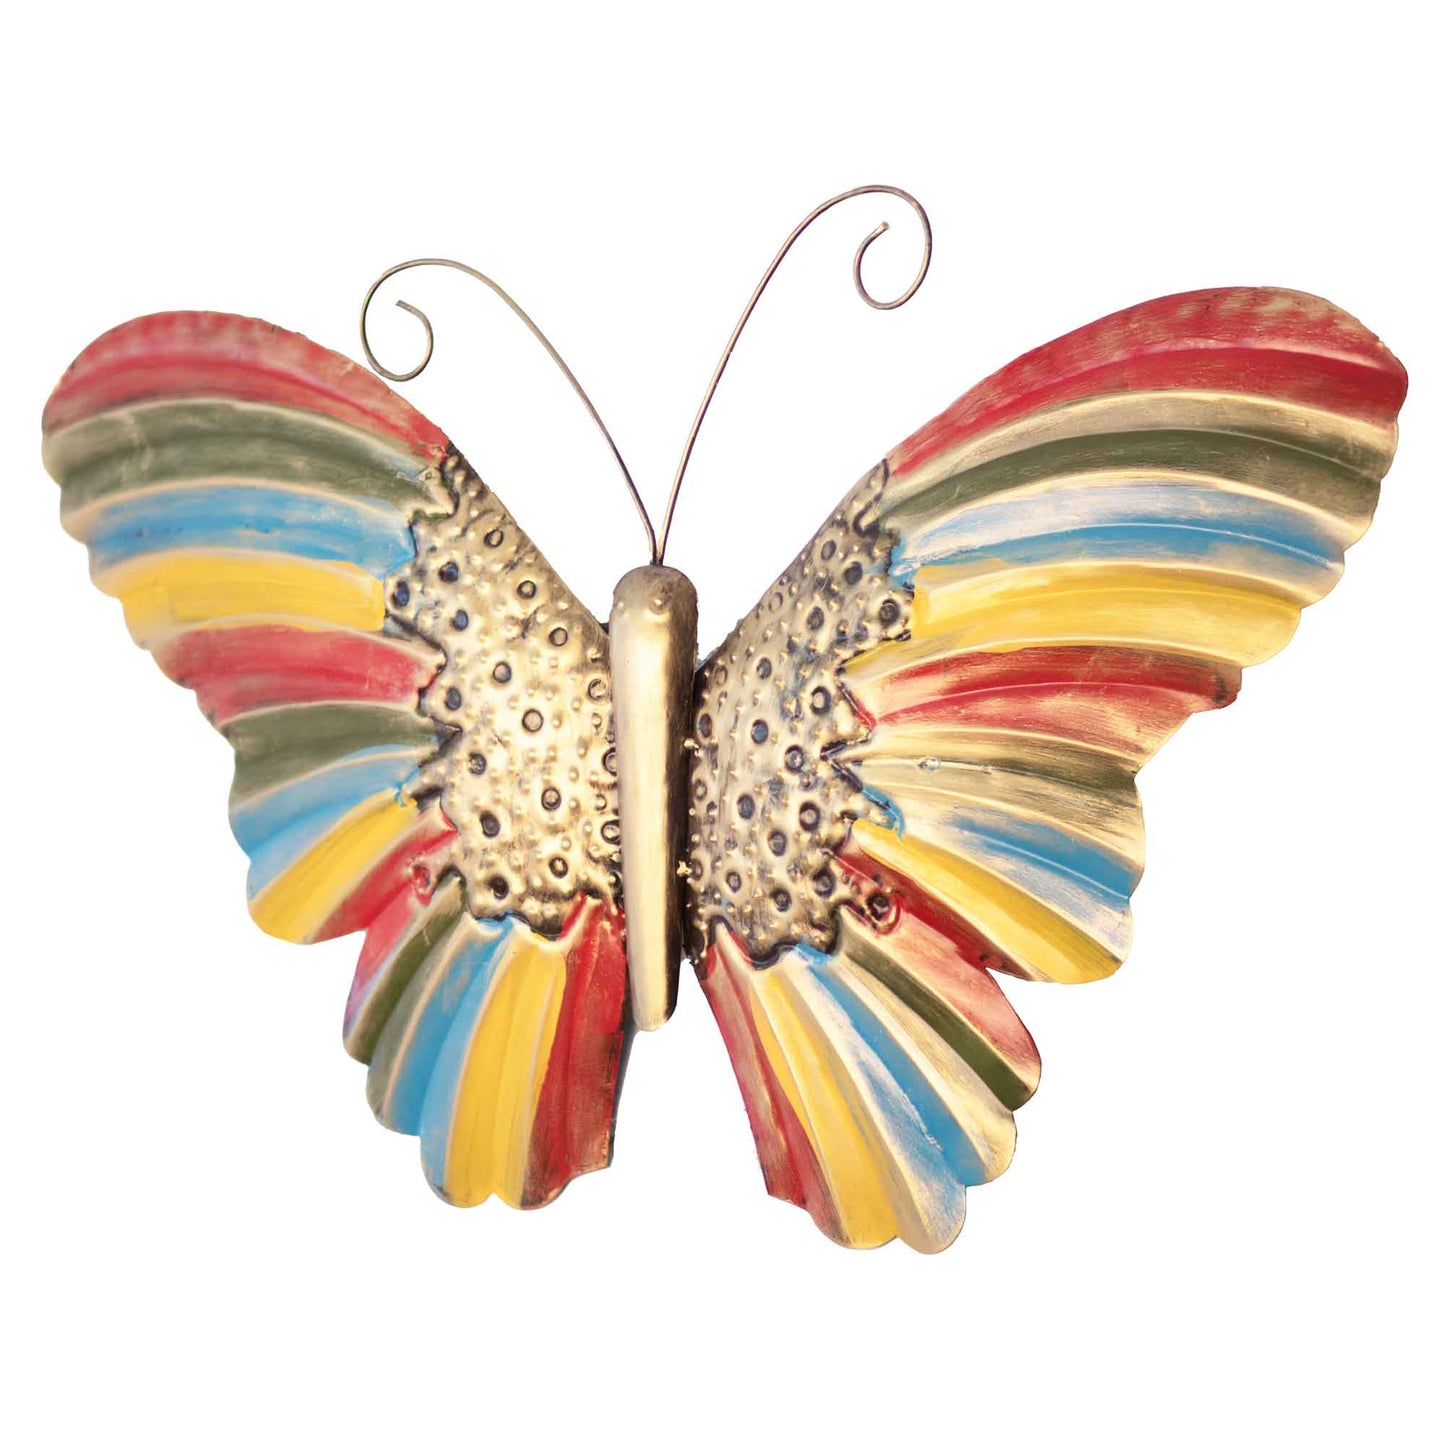 Kezevel Metal Butterfly Wall Decor - Metal Wall Art Multicolour Metal Wall Hangings for Living Room, Foyer and Home Decor